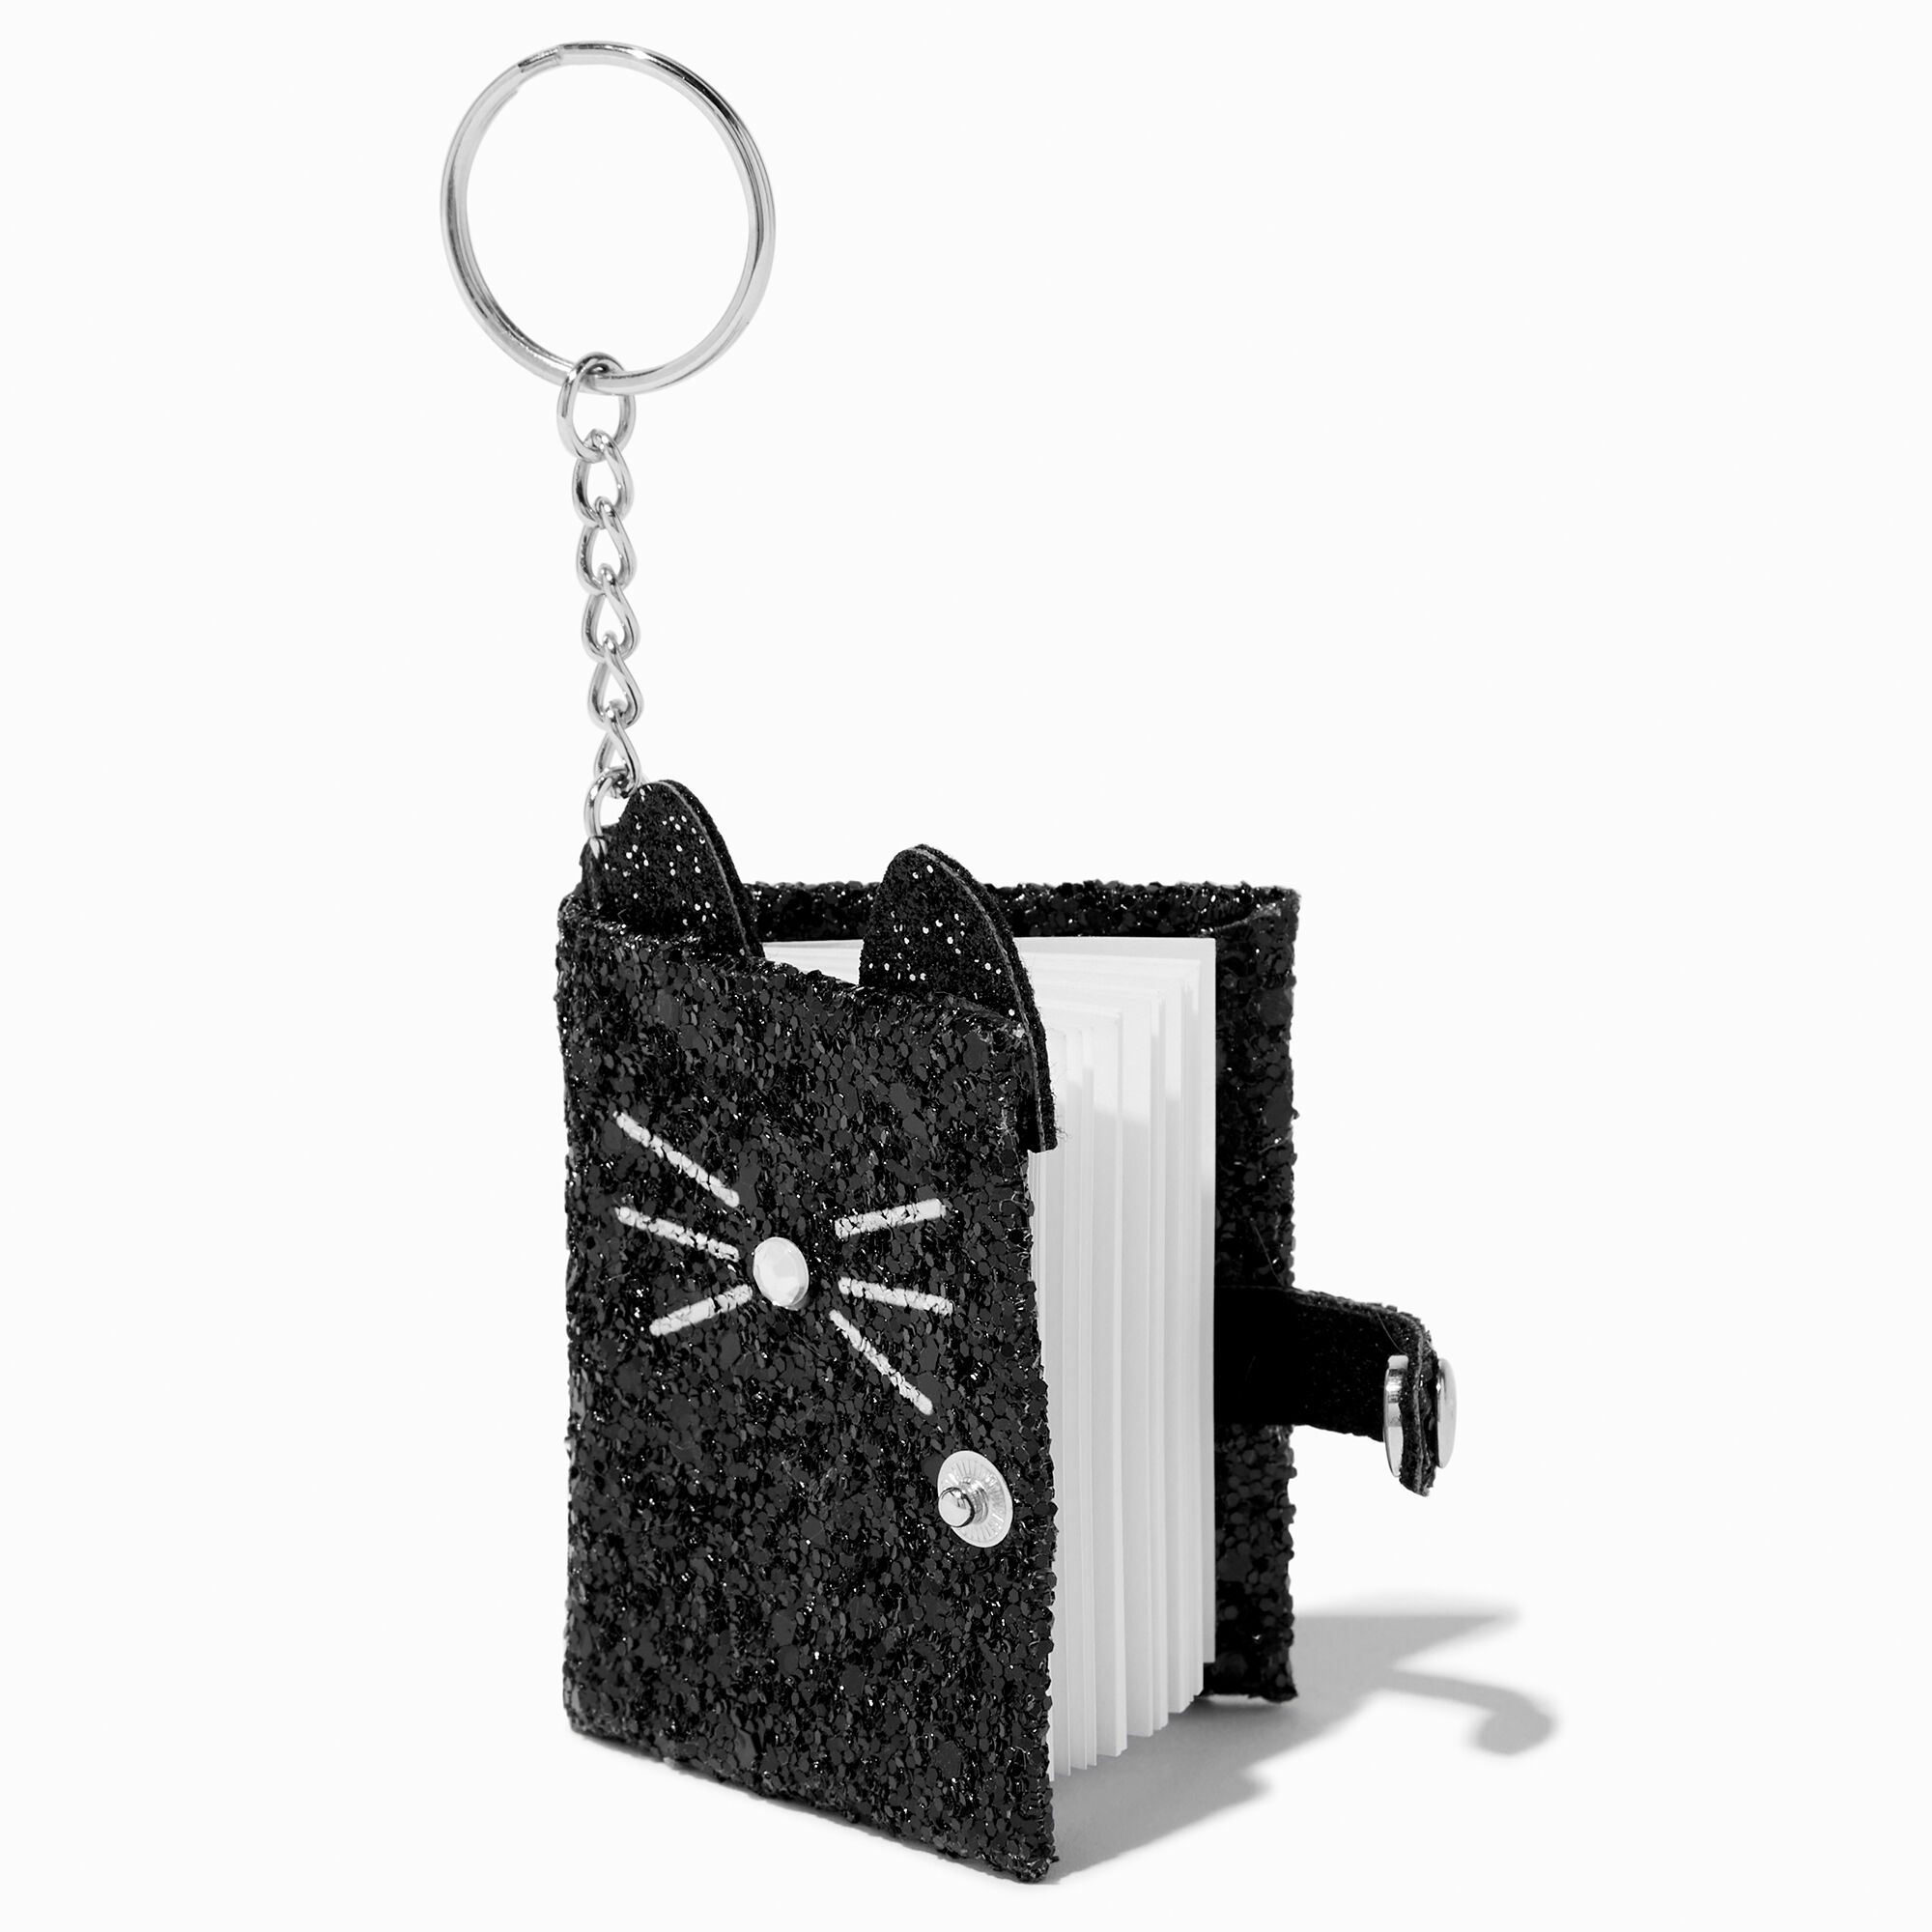 View Claires Cat Mini Diary Keyring Black information